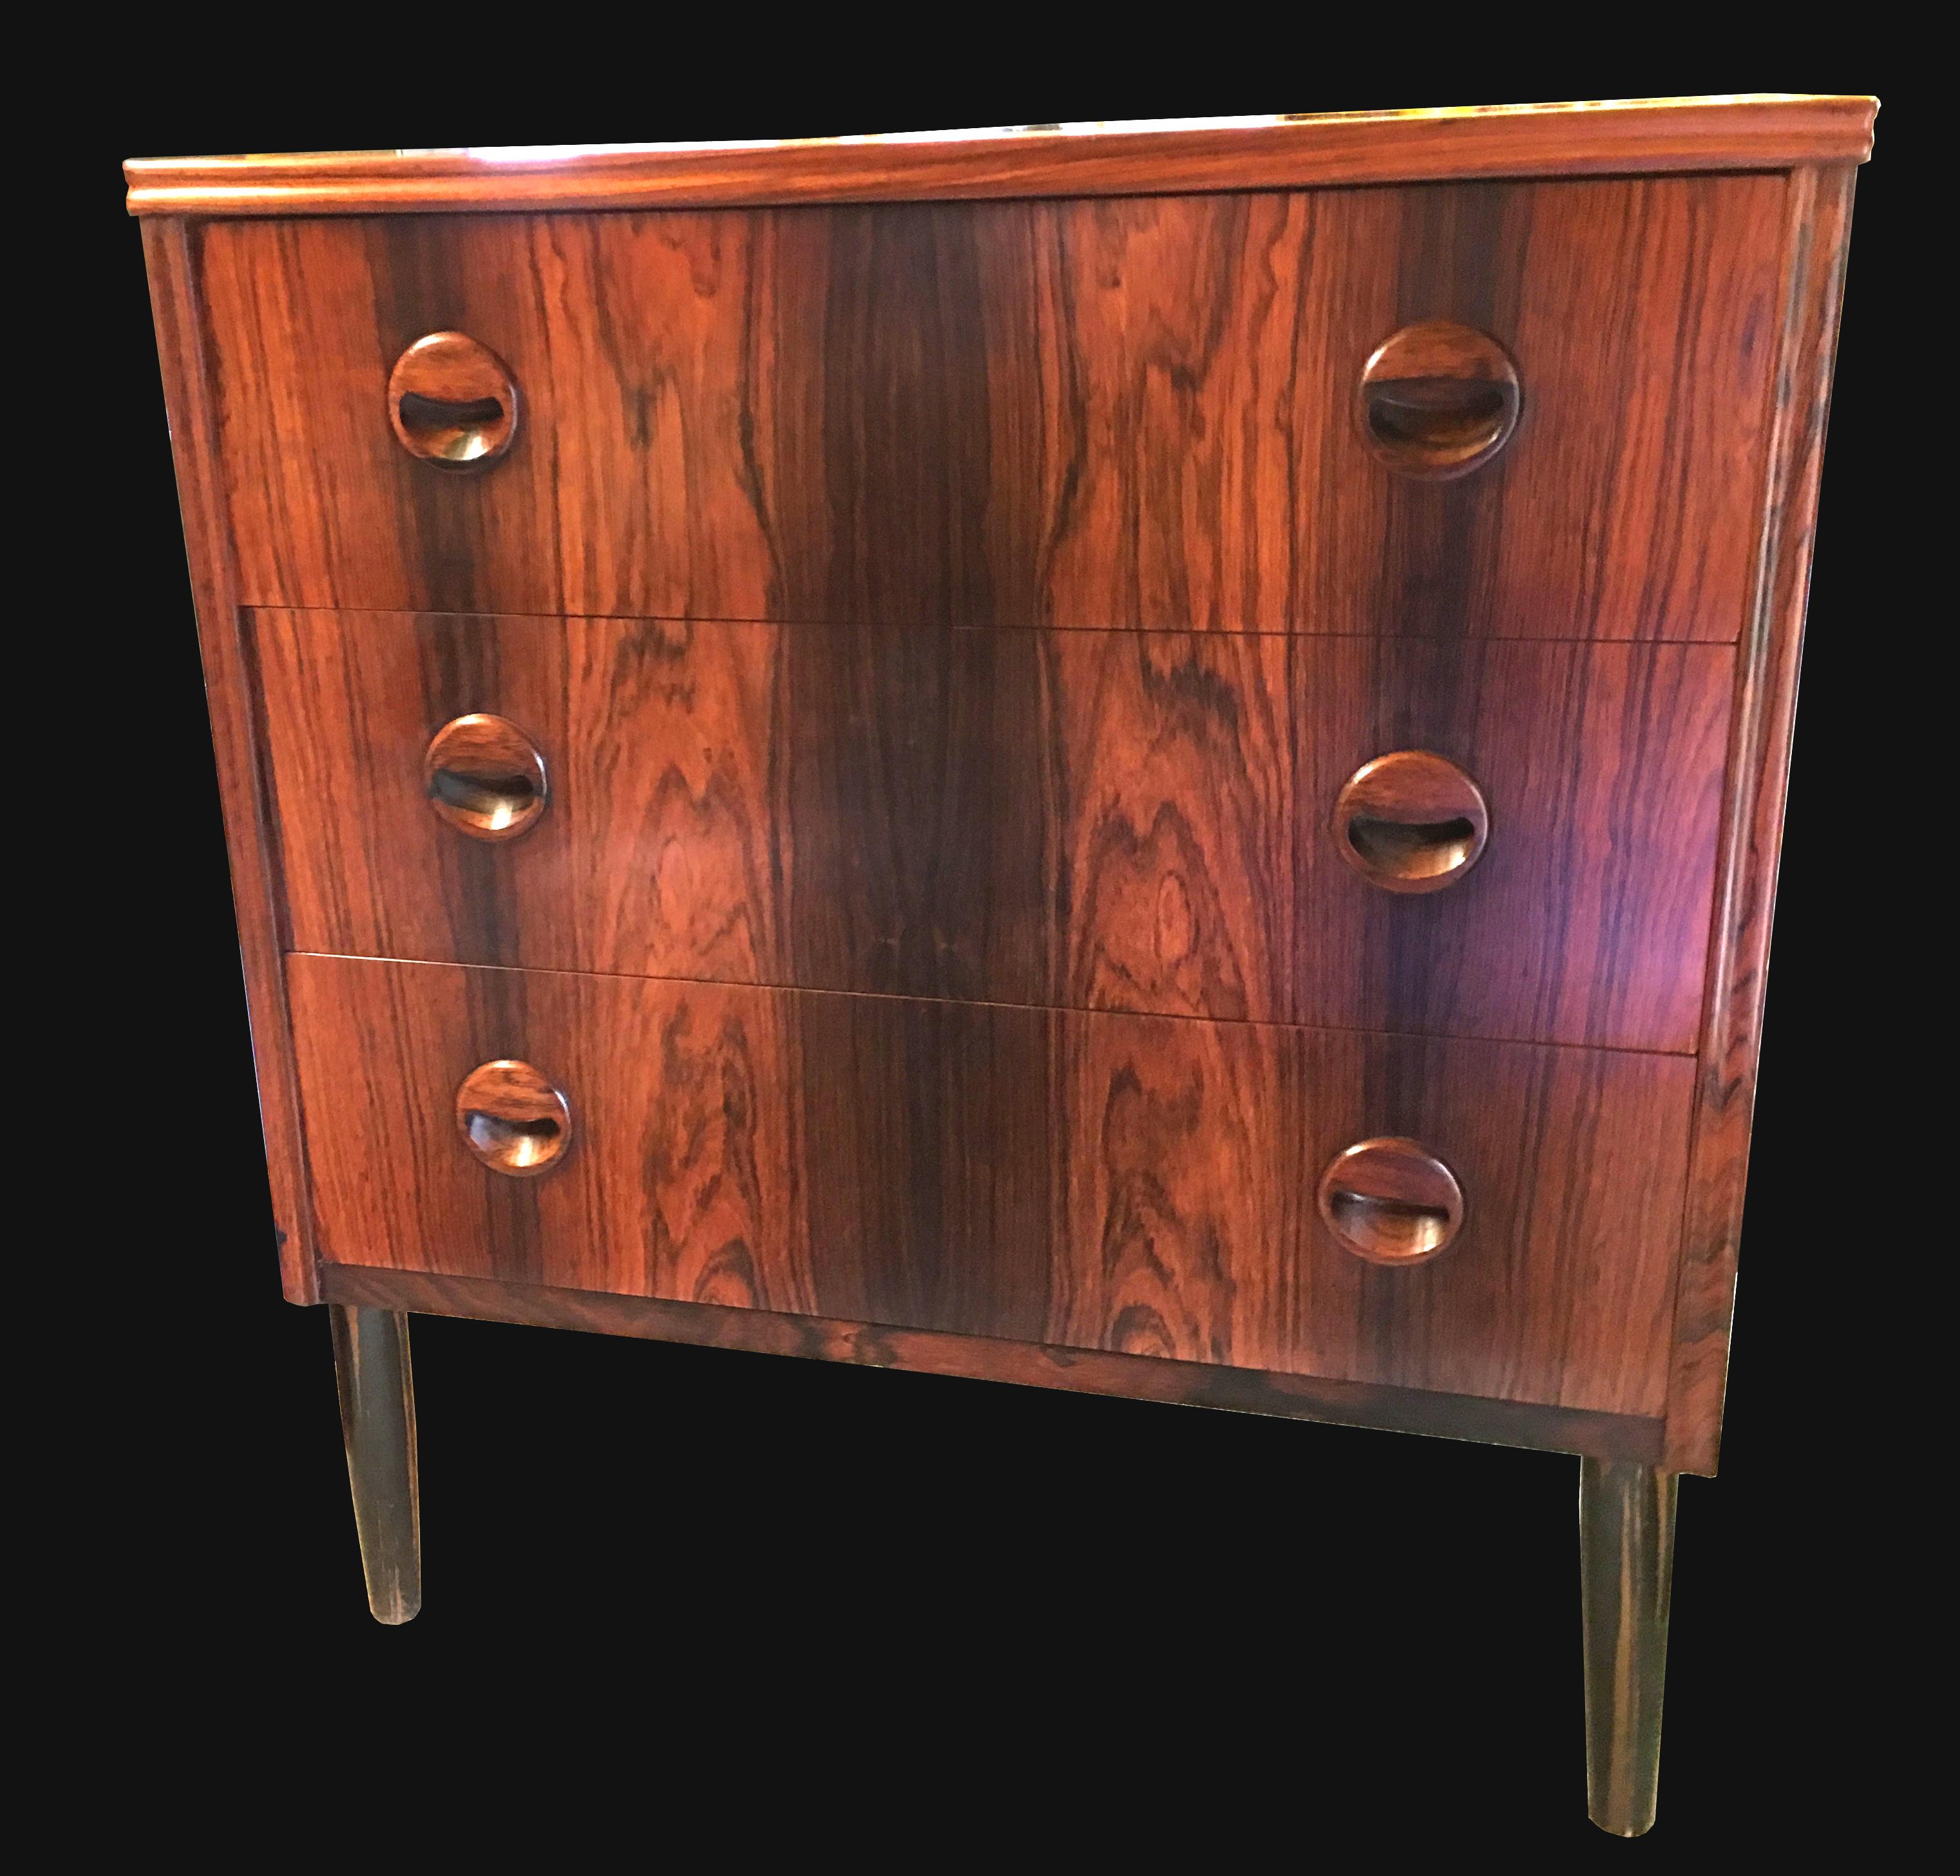 This very nice small three-drawer Danish chest is veneered in Santos Rosewood, scientific name Machaerium Scleroxylon, a species which does not require a CITES certificate for cross border sales.
This item is in very good condition.